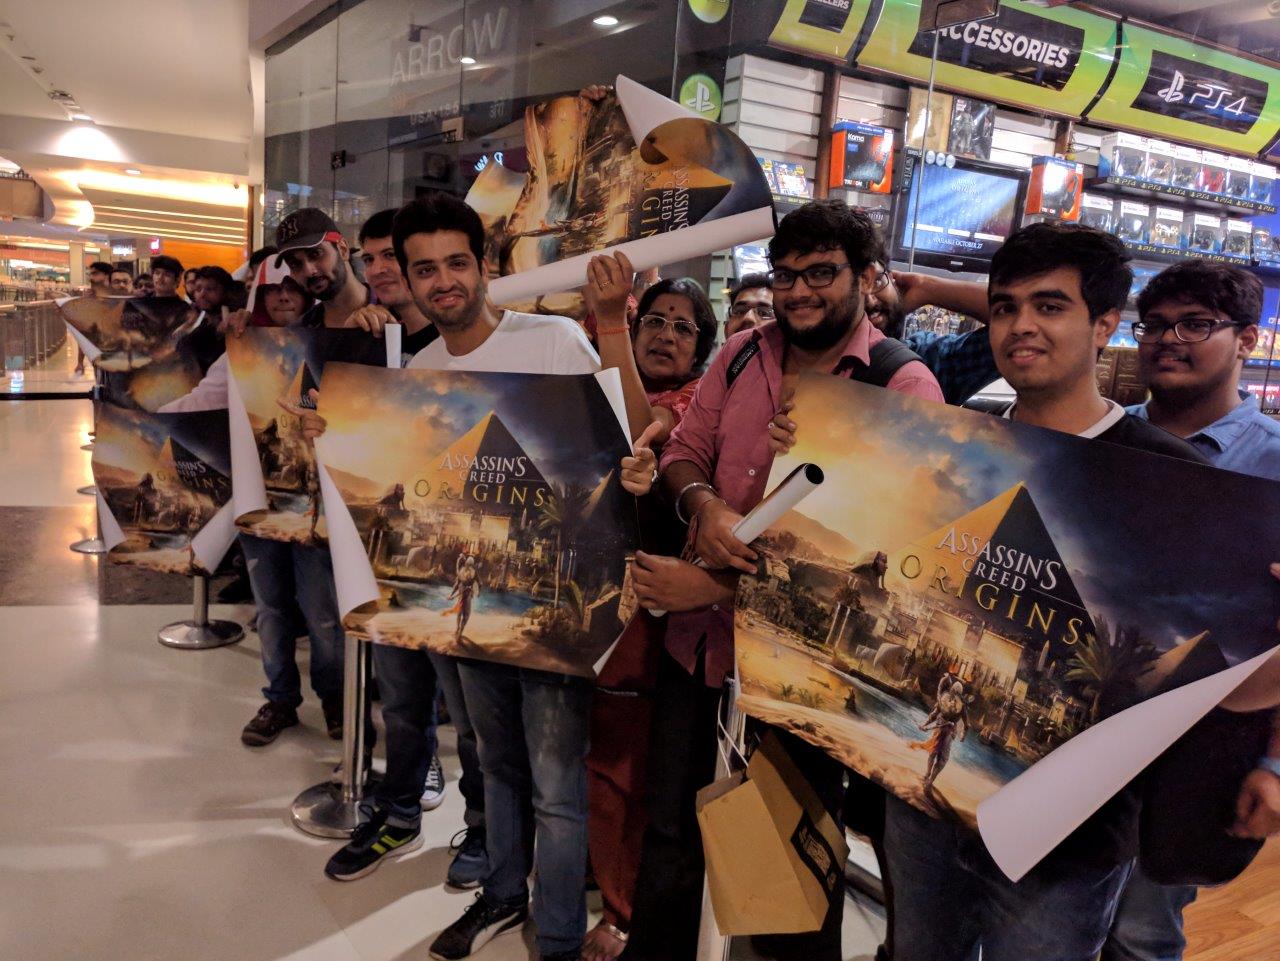 ASSASSIN'S CREED ORIGINS MIDNIGHT LAUNCH GETS OVERWHELMING RESPONSE